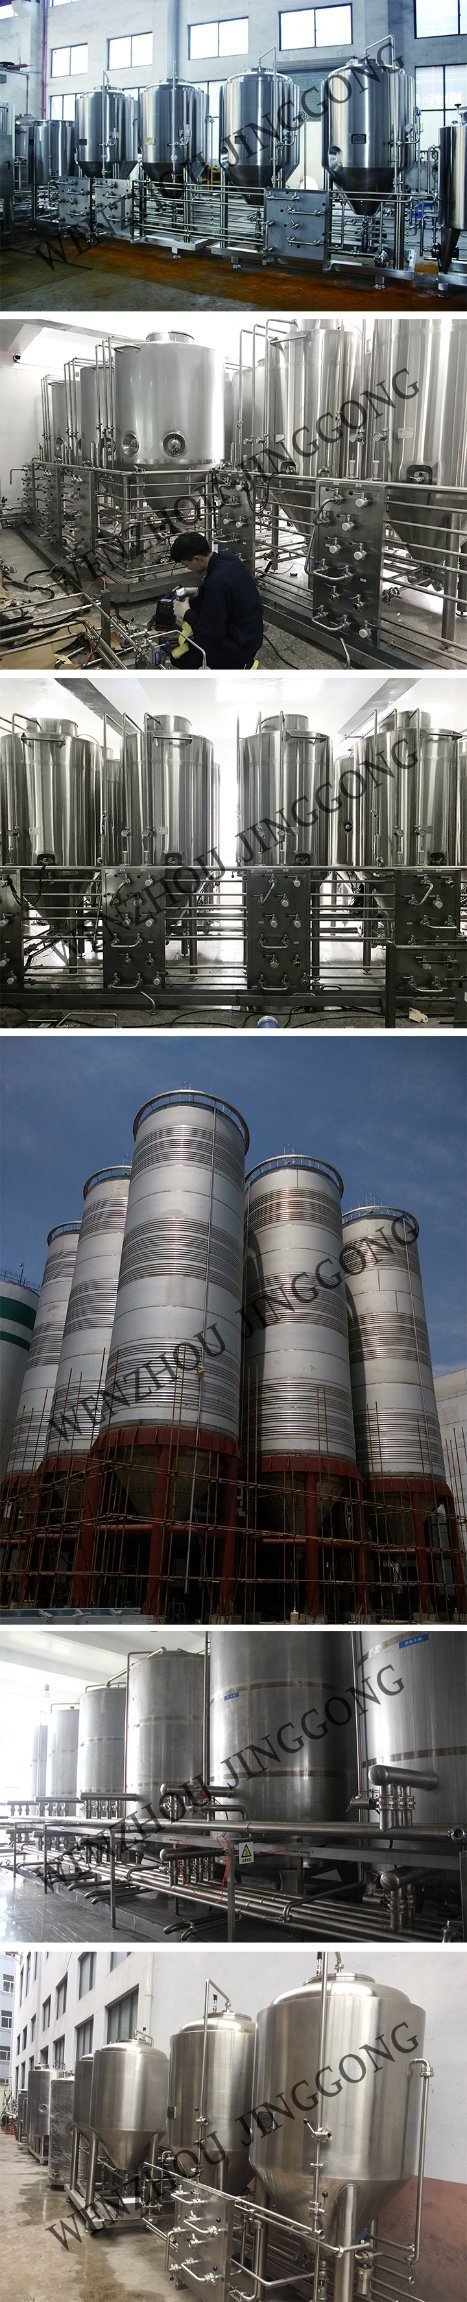 Jacketed Stainless Steel Industrial Mixing Tank / Storage Tank with Agitator